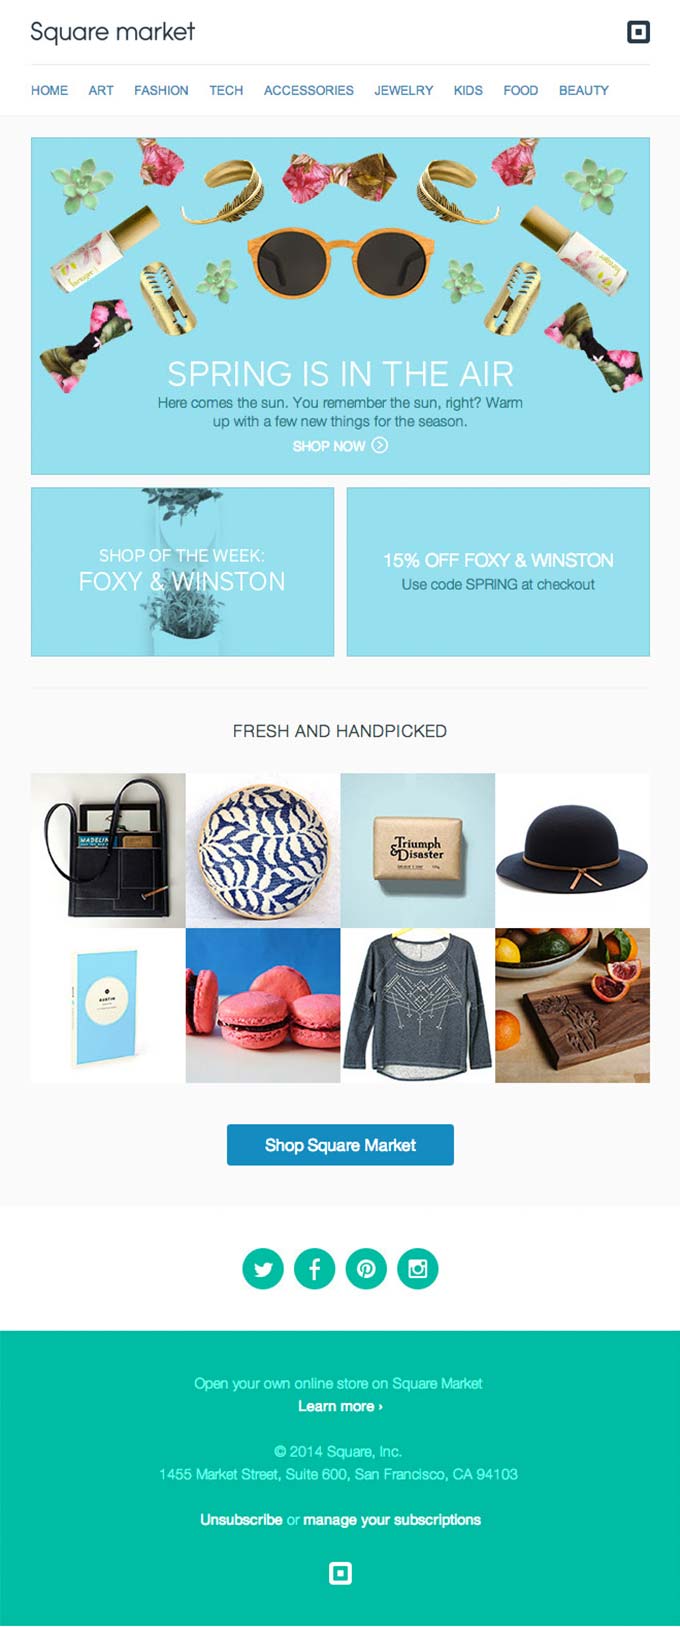 Featured Product Sale Email Design from Square Market